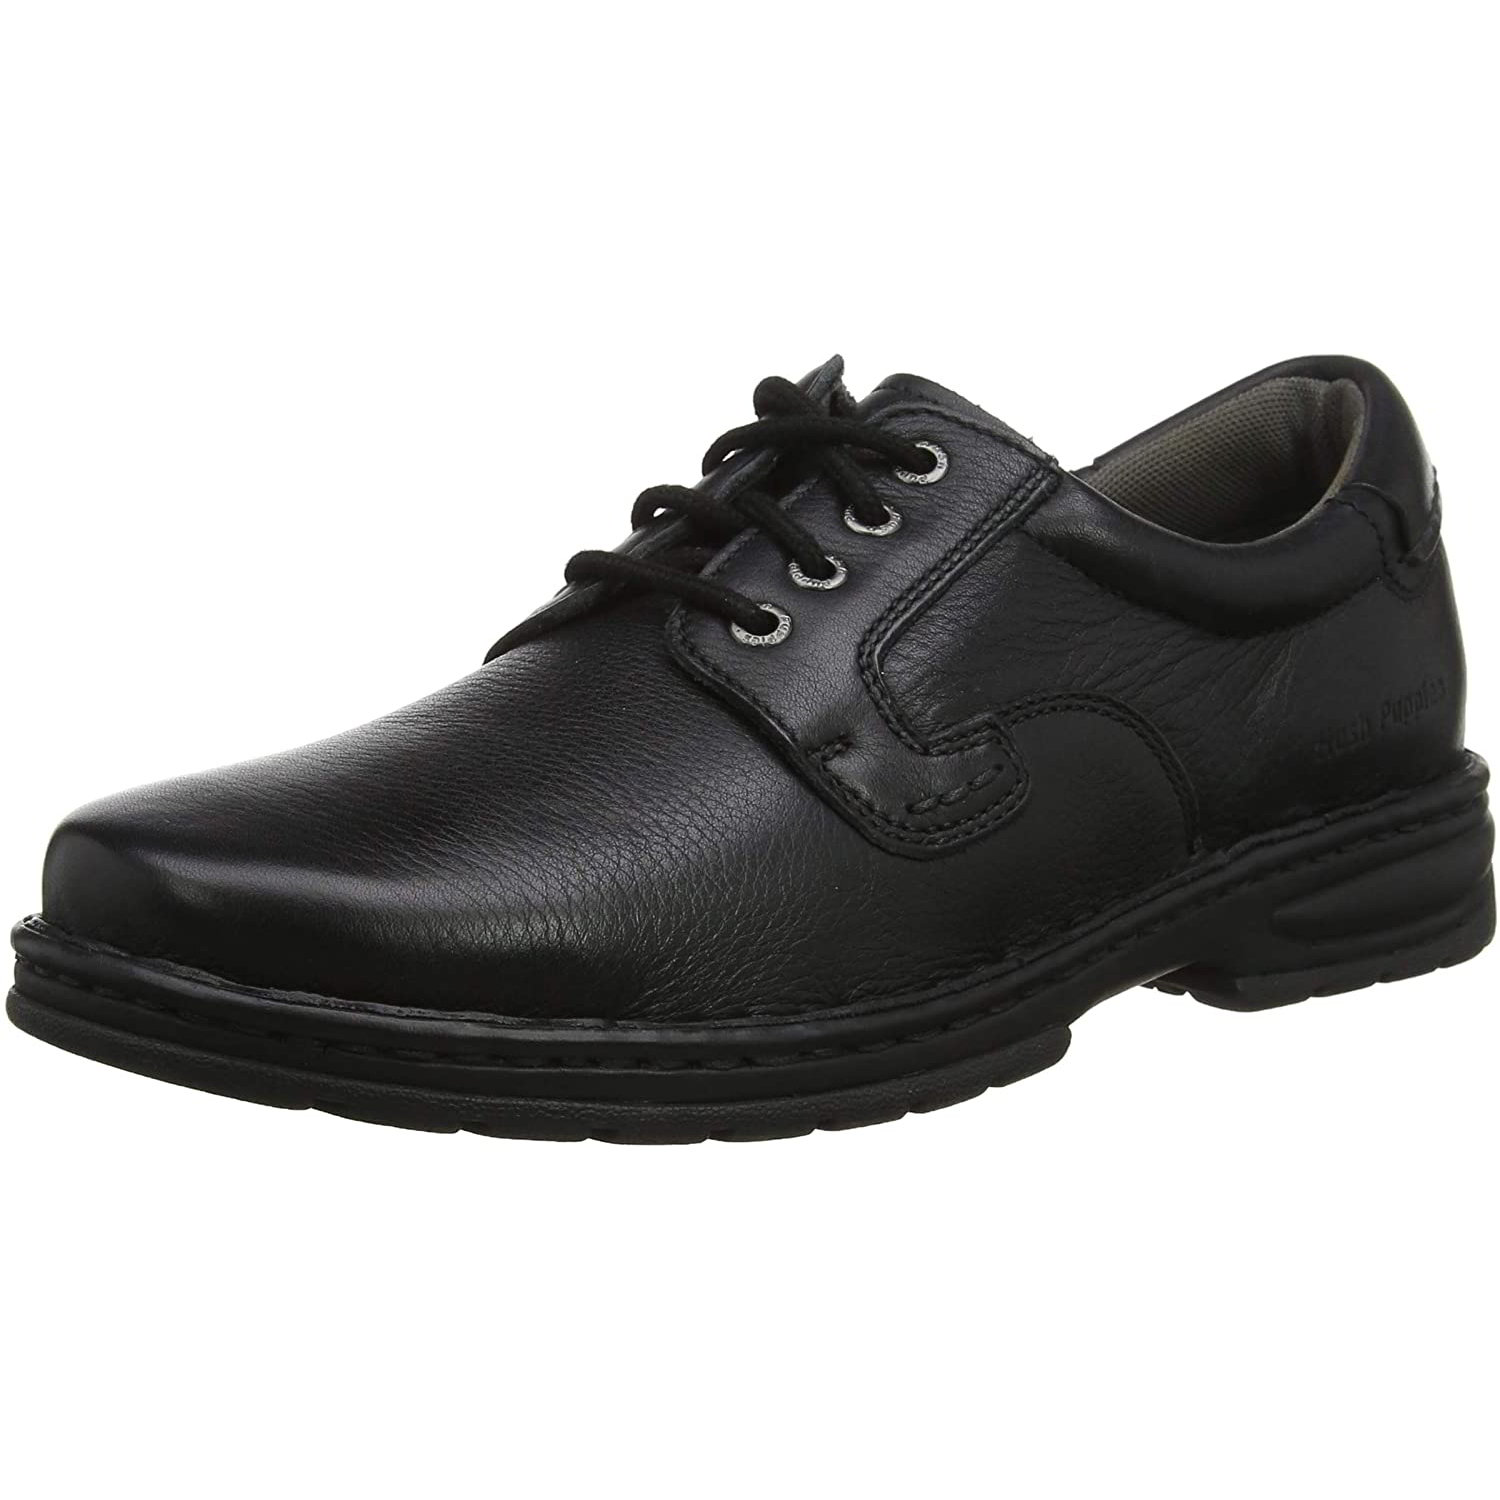 Hush Puppies Men's Outlaw II Wide Fit Shoes - UK 12